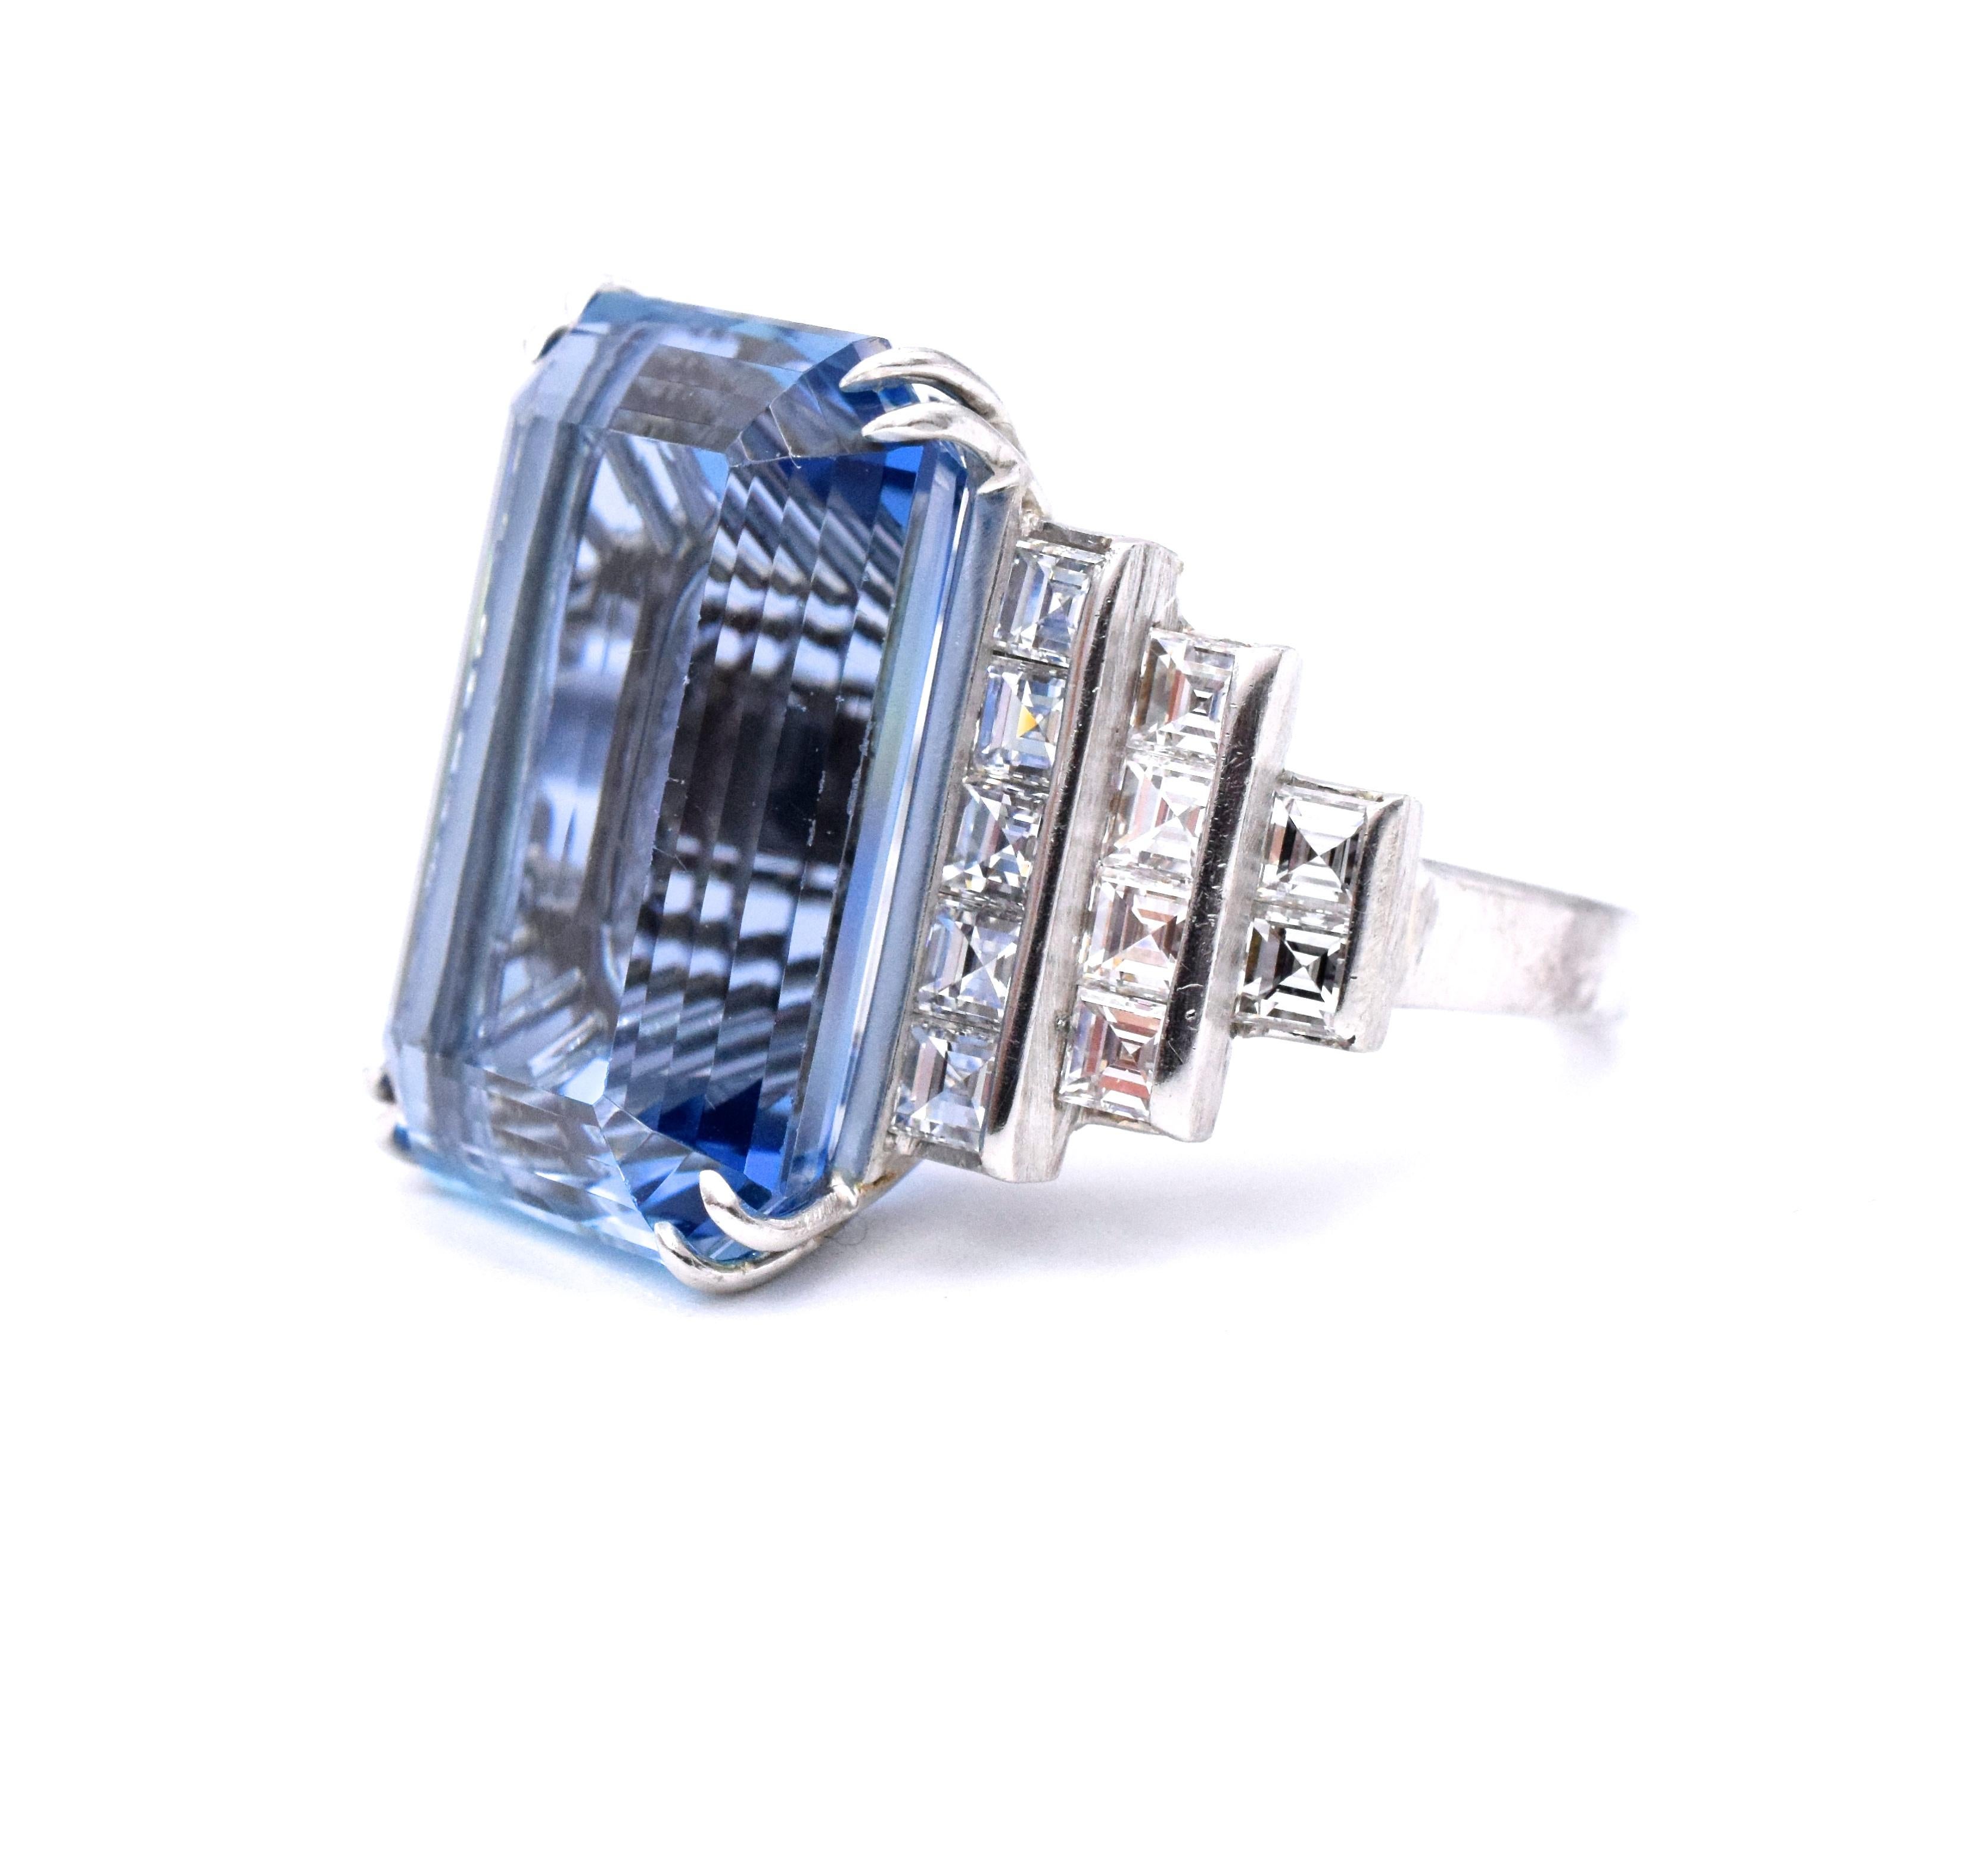 Impressive NALLY  aquamarine & diamond ring, that will make a statement anytime...Platinum
 Emerald cut aquamarine is 19.49 carats with step cut mounting with 22 square cut diamonds with total weight of  totaling 2.42 CT, G - Carats set in